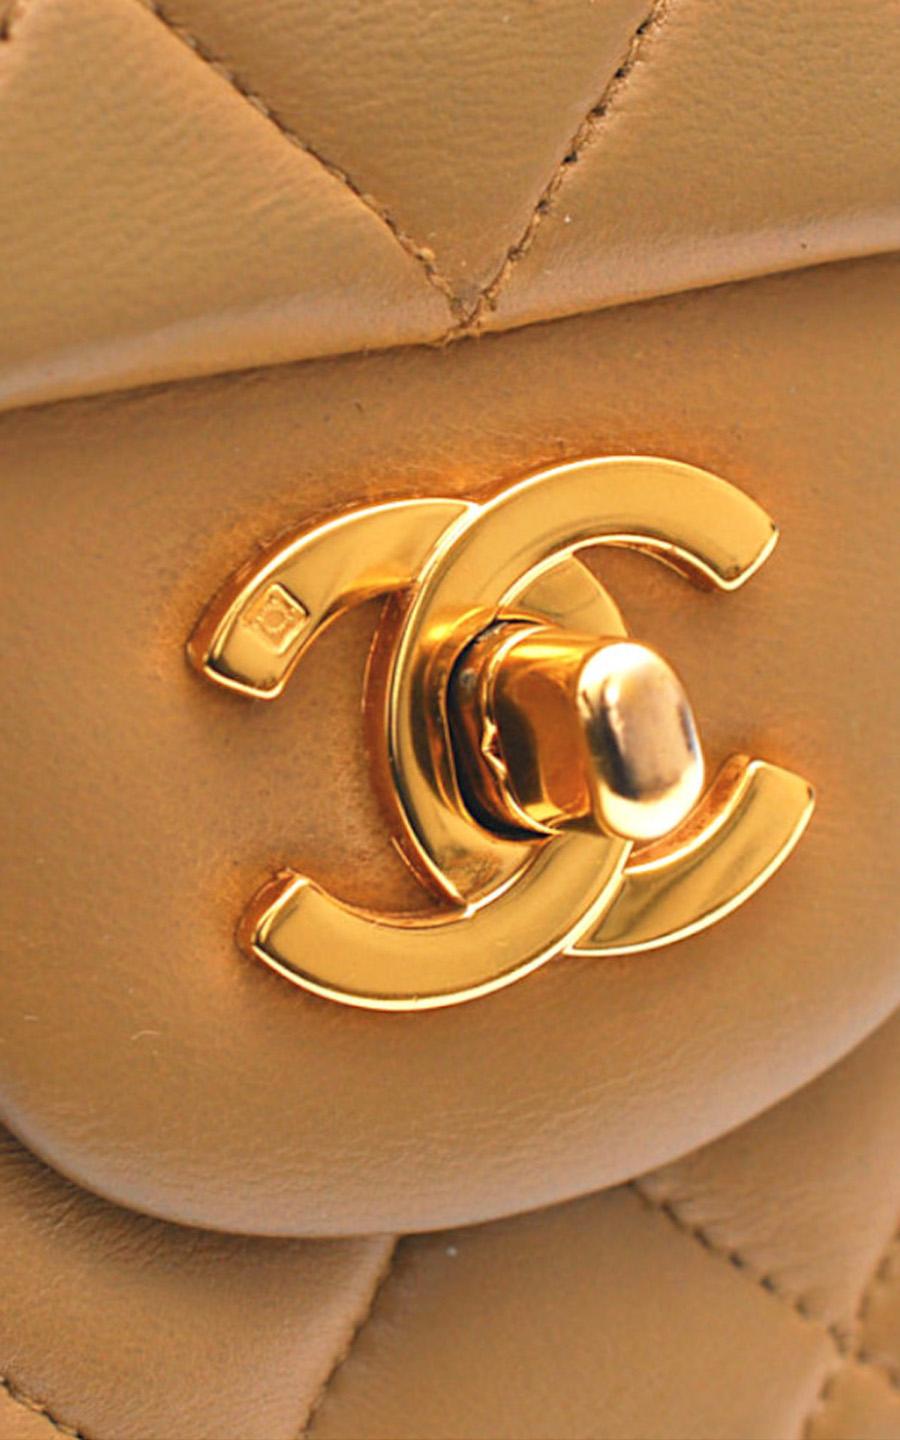 Chanel Timeless handbag in dark beige quilted leather Gold Chain  5